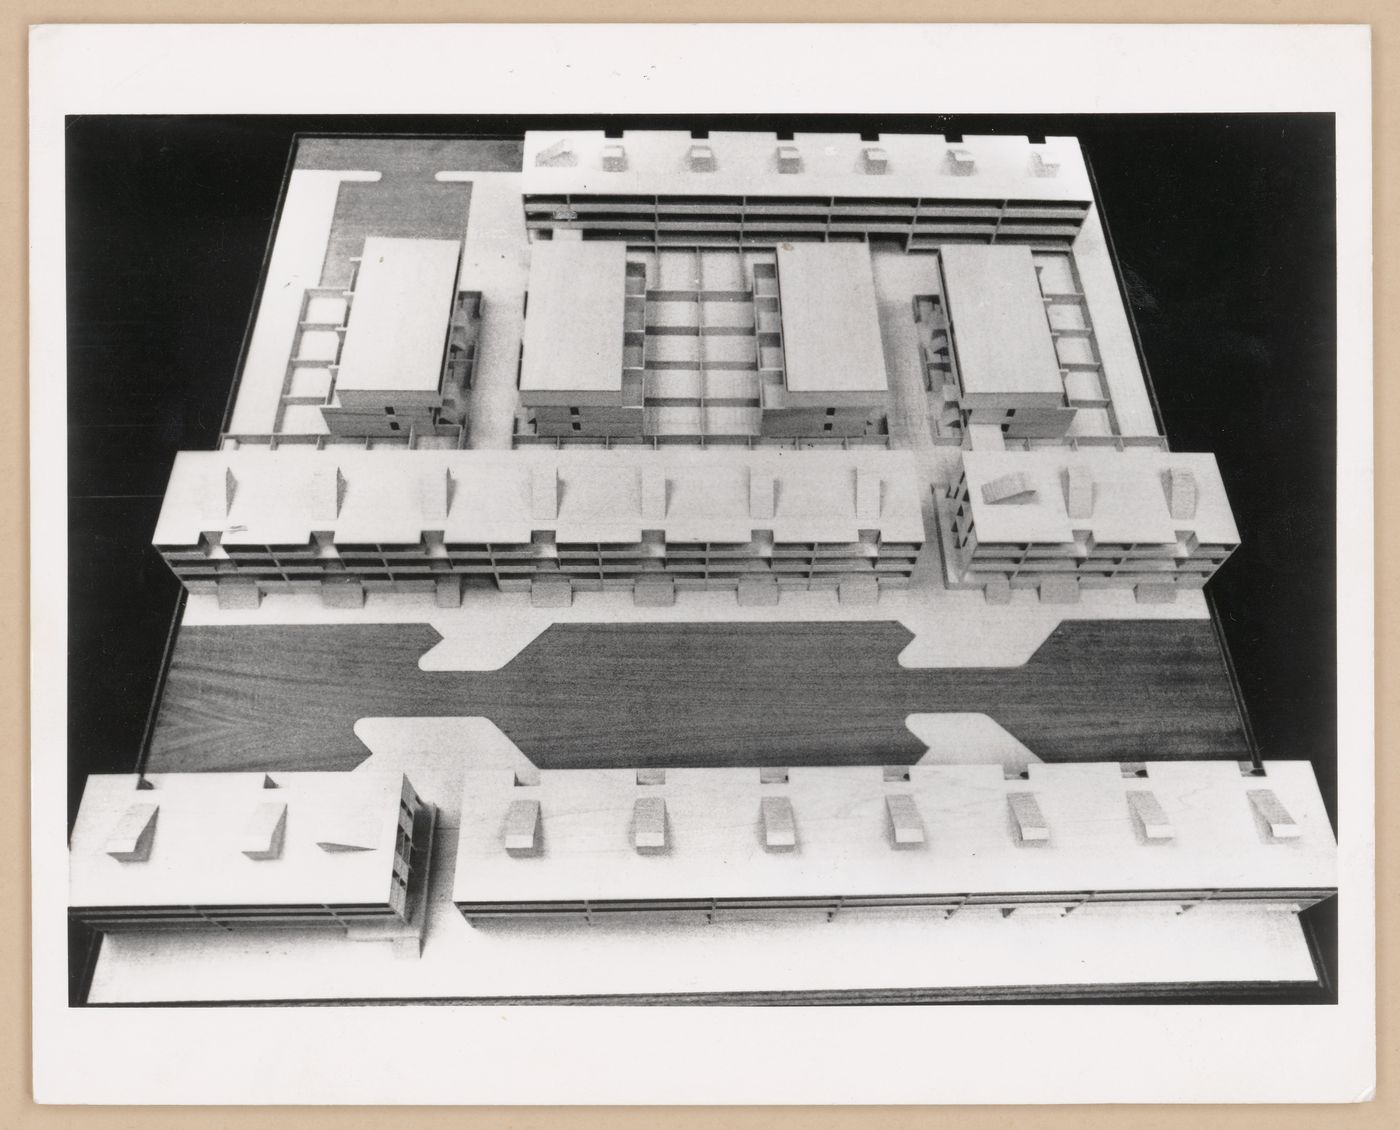 Photograph of Low-Rise, High-Density model for MoMA exhibition